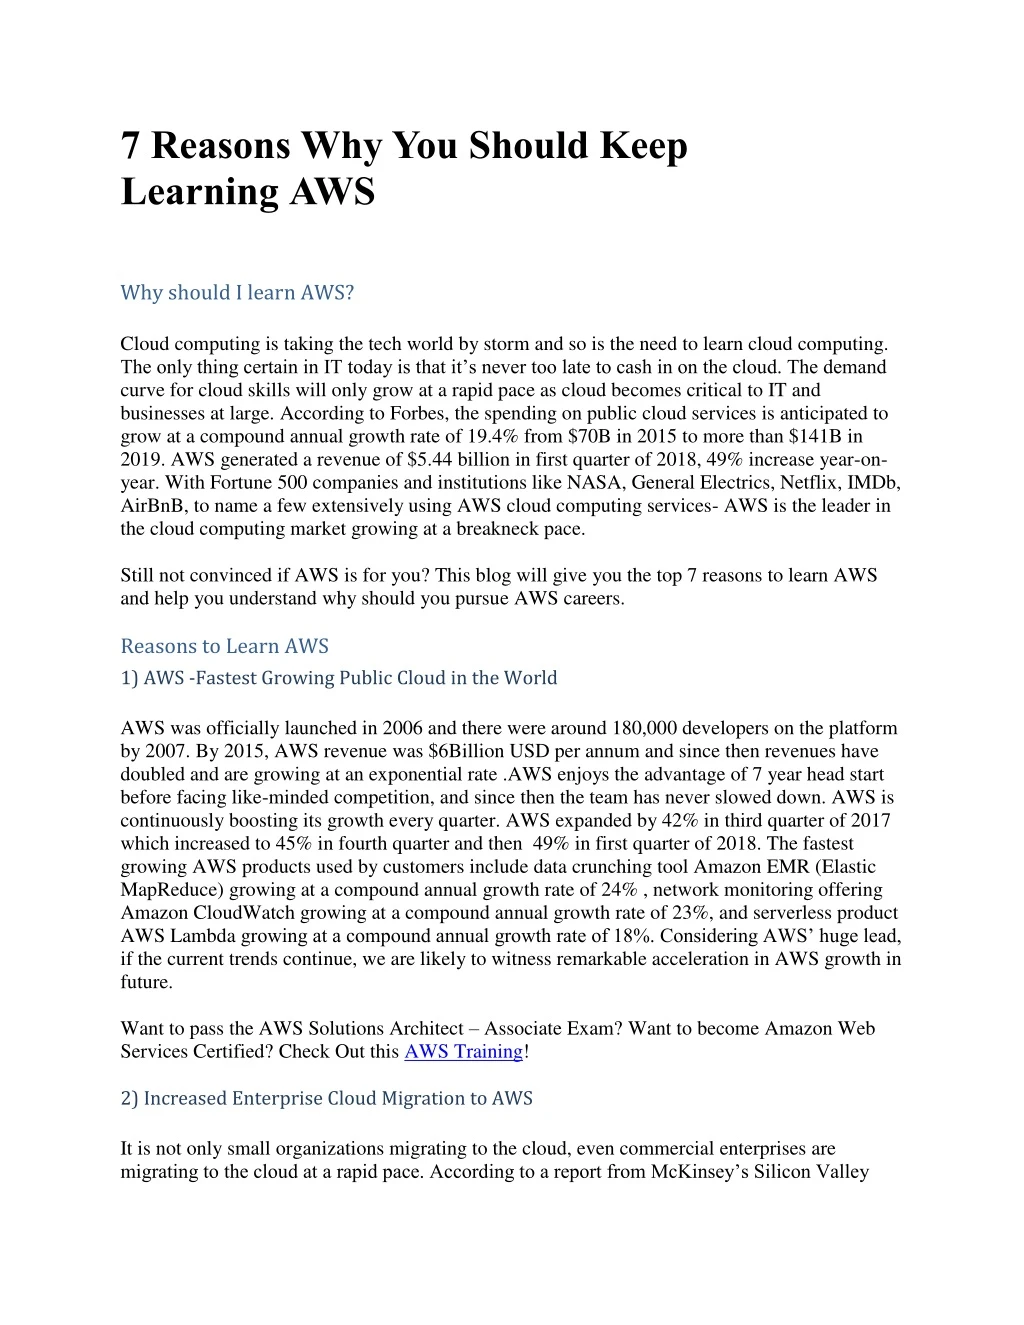 7 reasons why you should keep learning aws